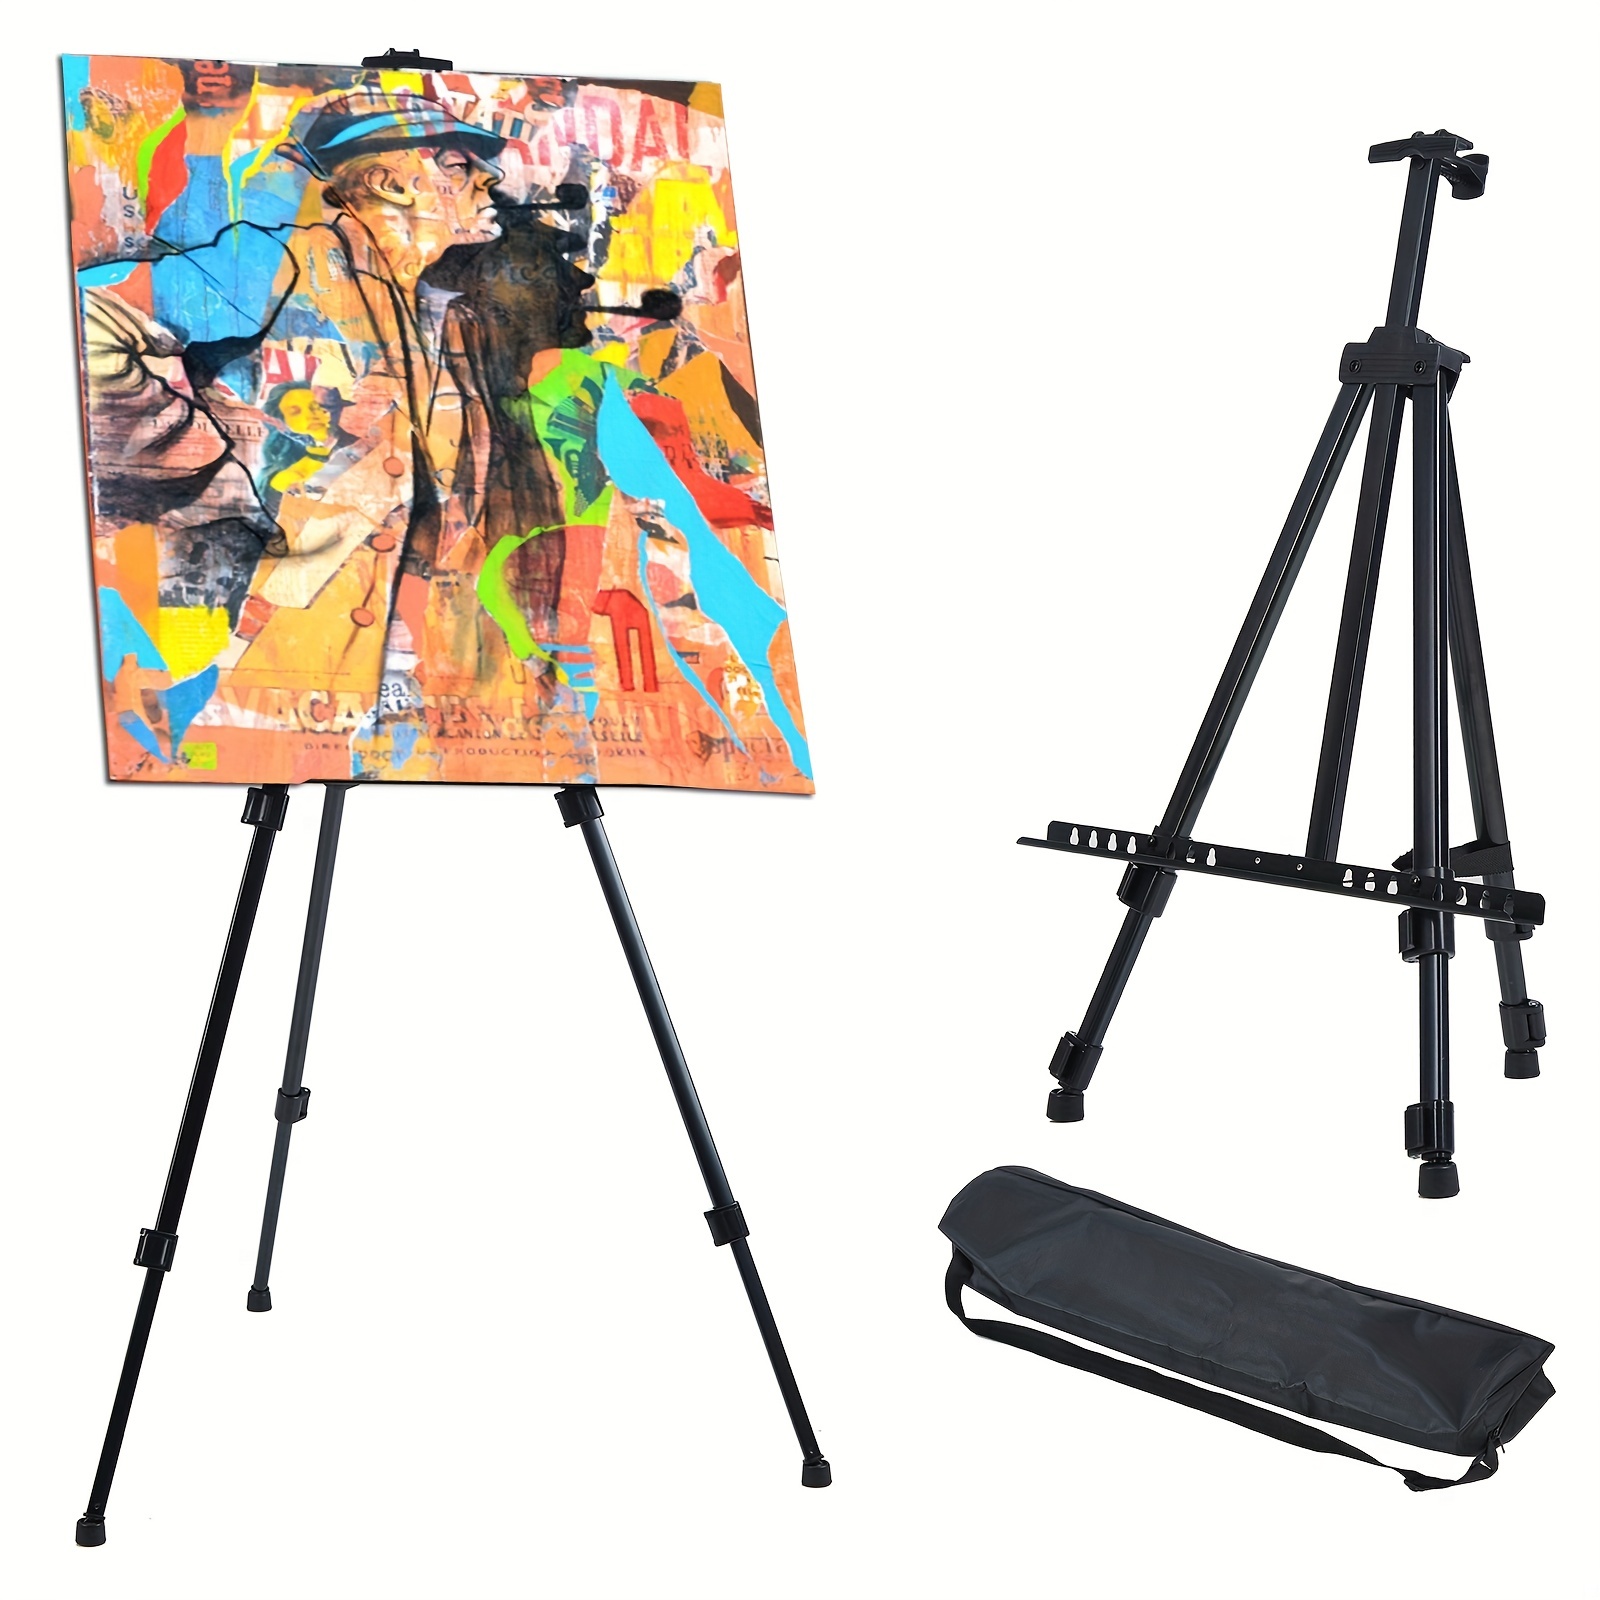 RRFTOK Artist Easel Stand,Metal Tripod Adjustable Easel for Painting  Canvases Height from 17 to 66 Inch,Carry Bag for Table-Top/Floor Drawing  and